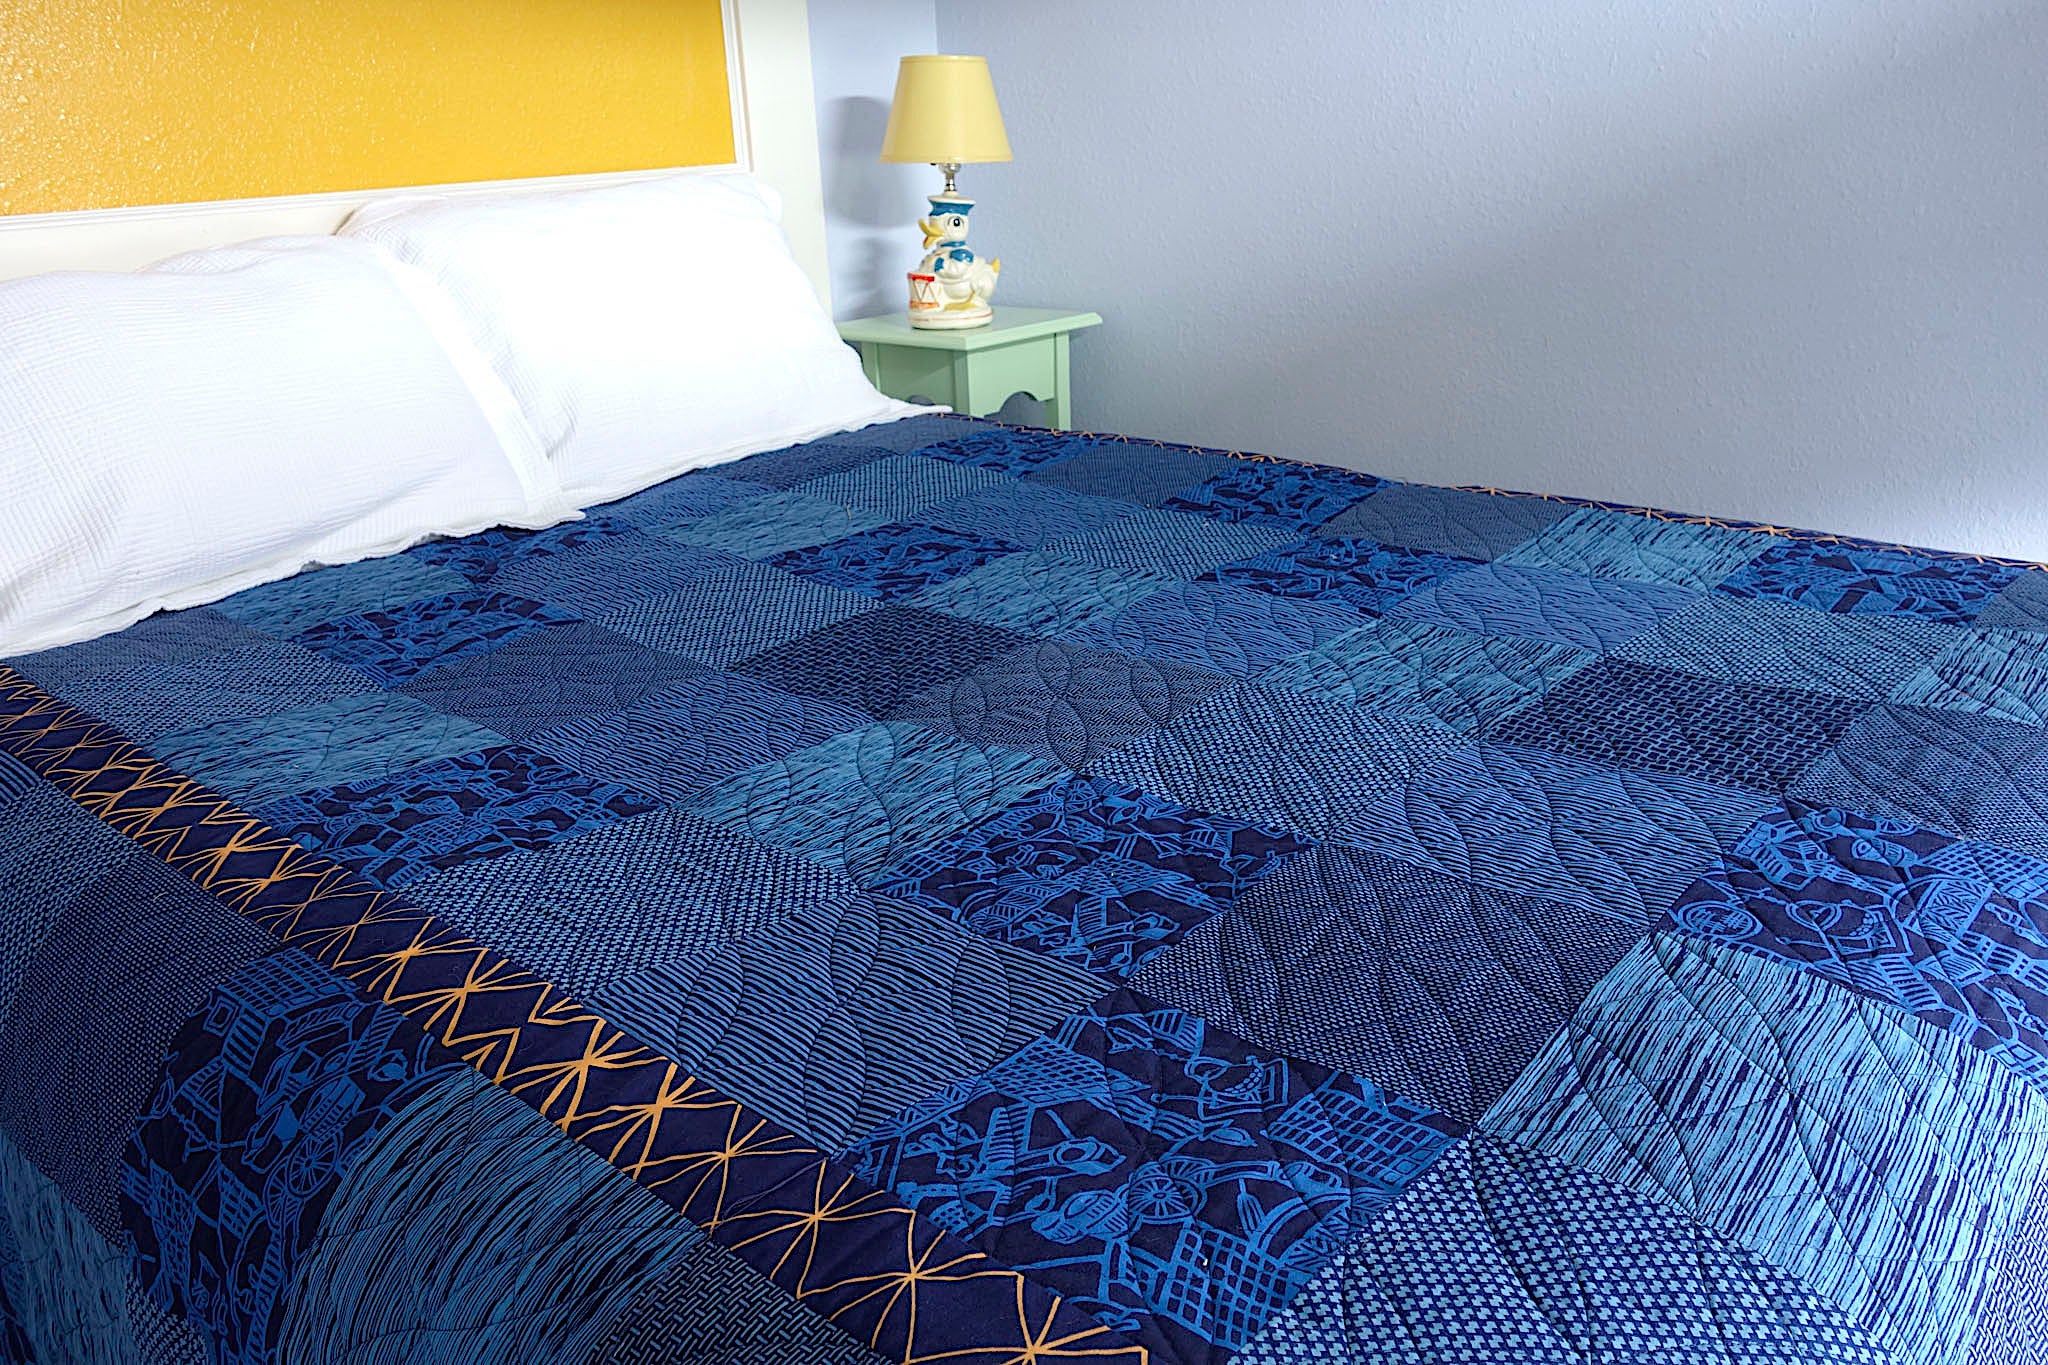 Indiglow, a king-size quilt by Patricia Belyea